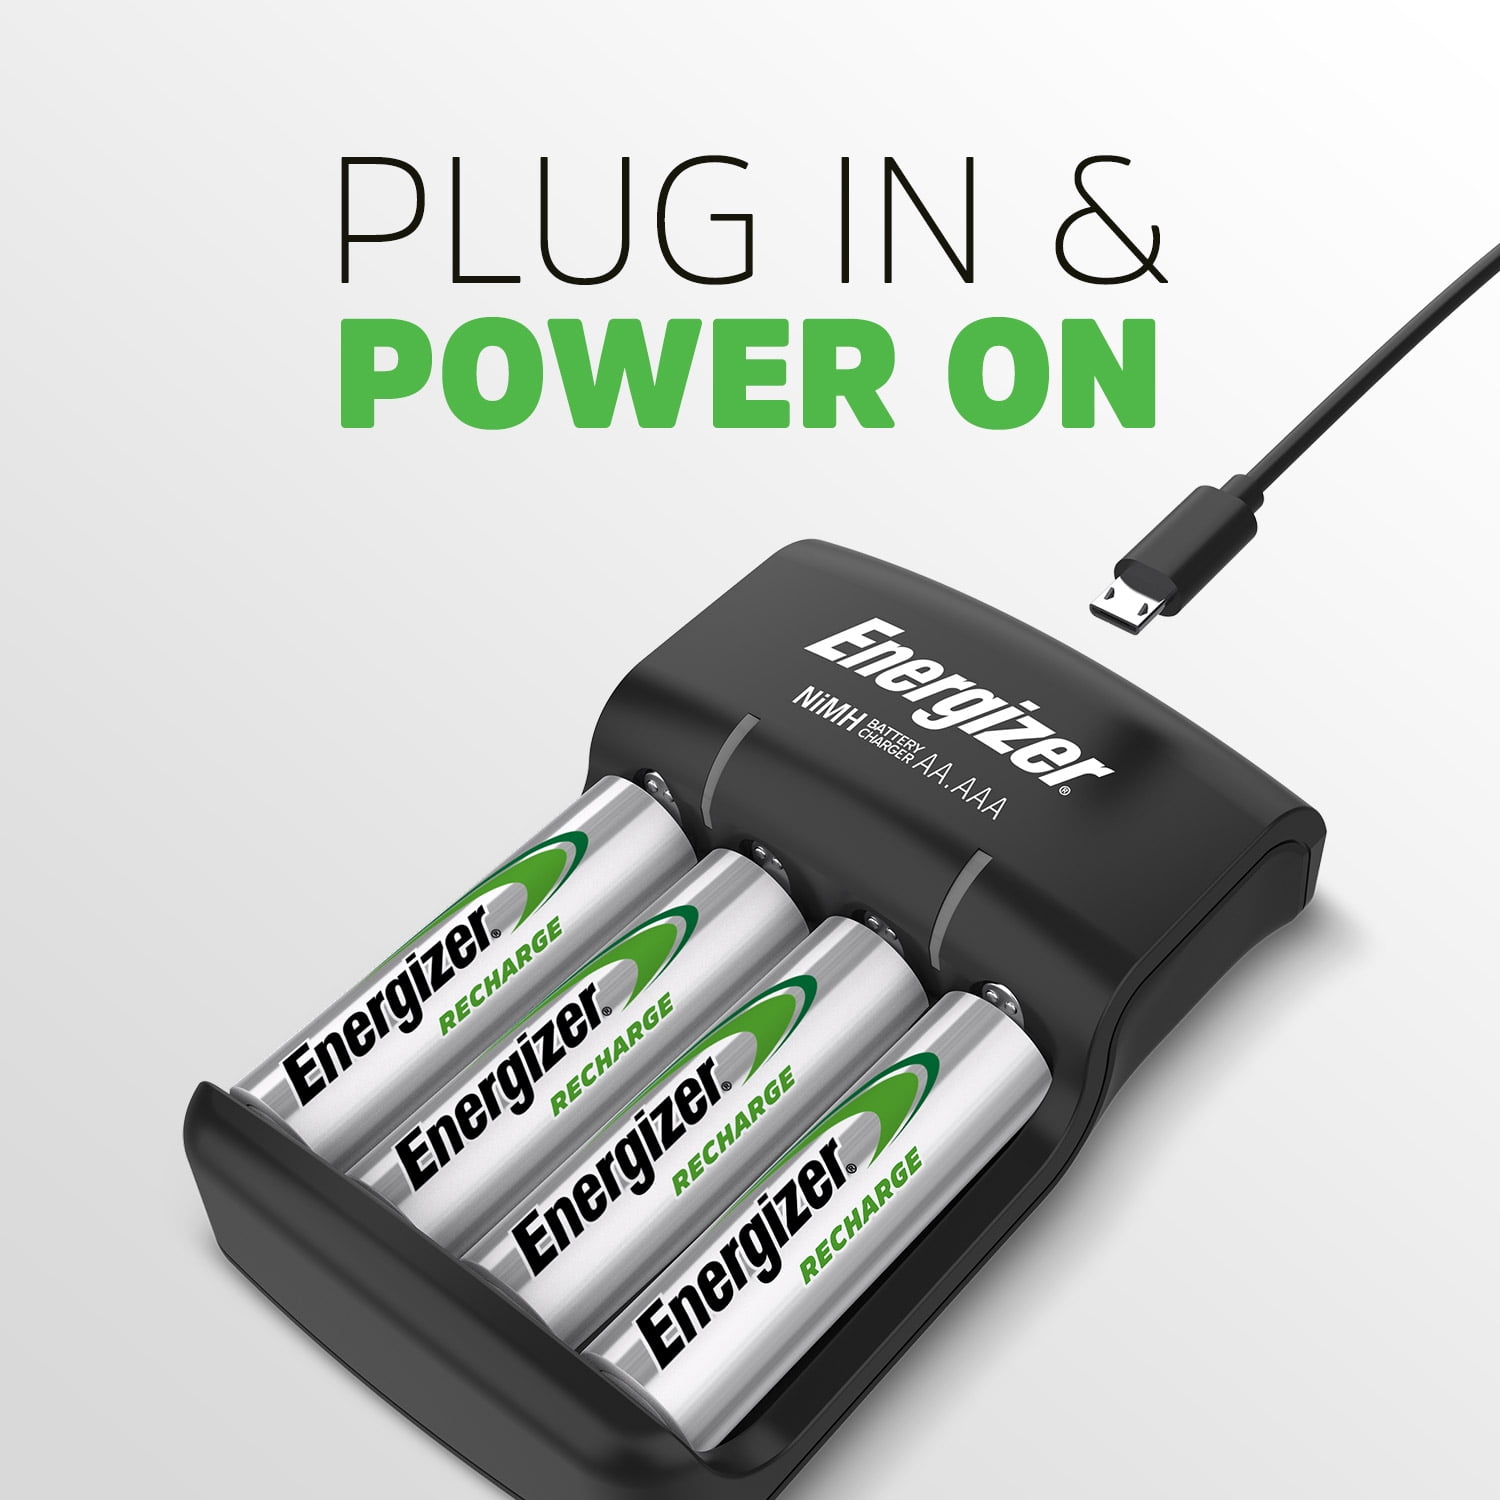 Energizer Battery Charger, AAA and Rechargeable AA Batteries Charger  CHVCWB2 - Best Buy